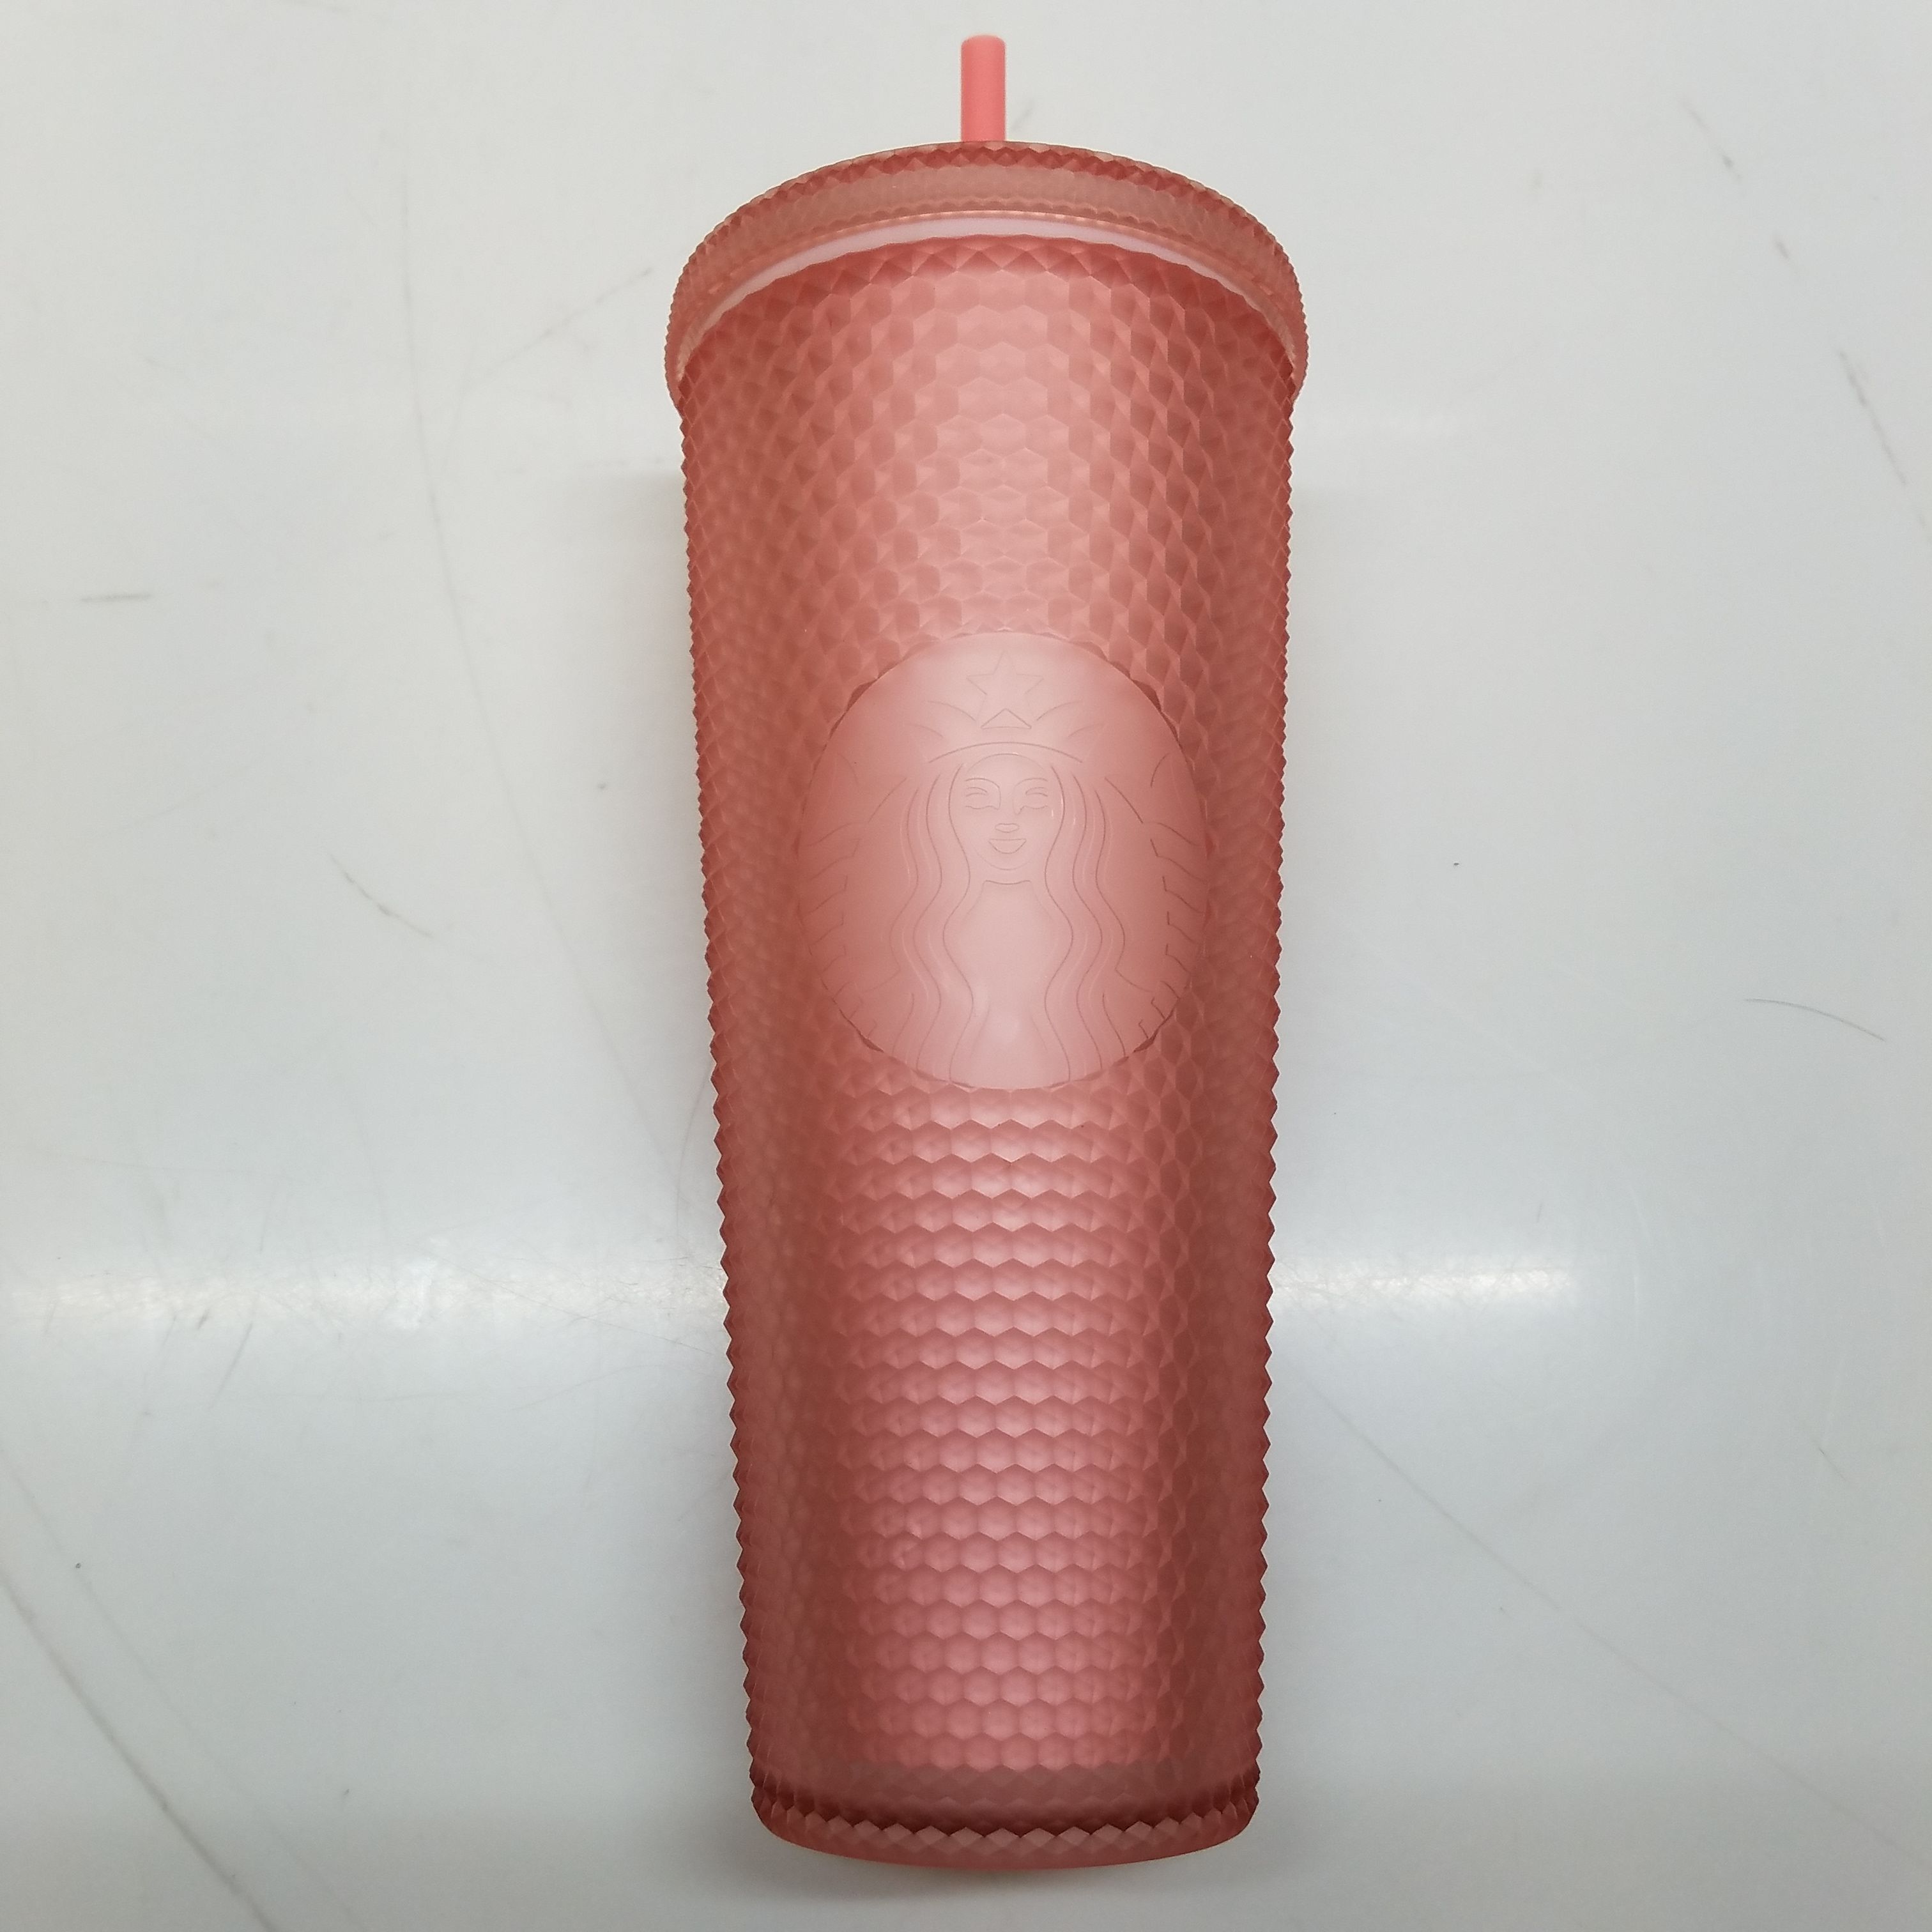 Starbucks Released a Matte Pink Studded Tumbler, and Shoppers Are Already  Stocking Up